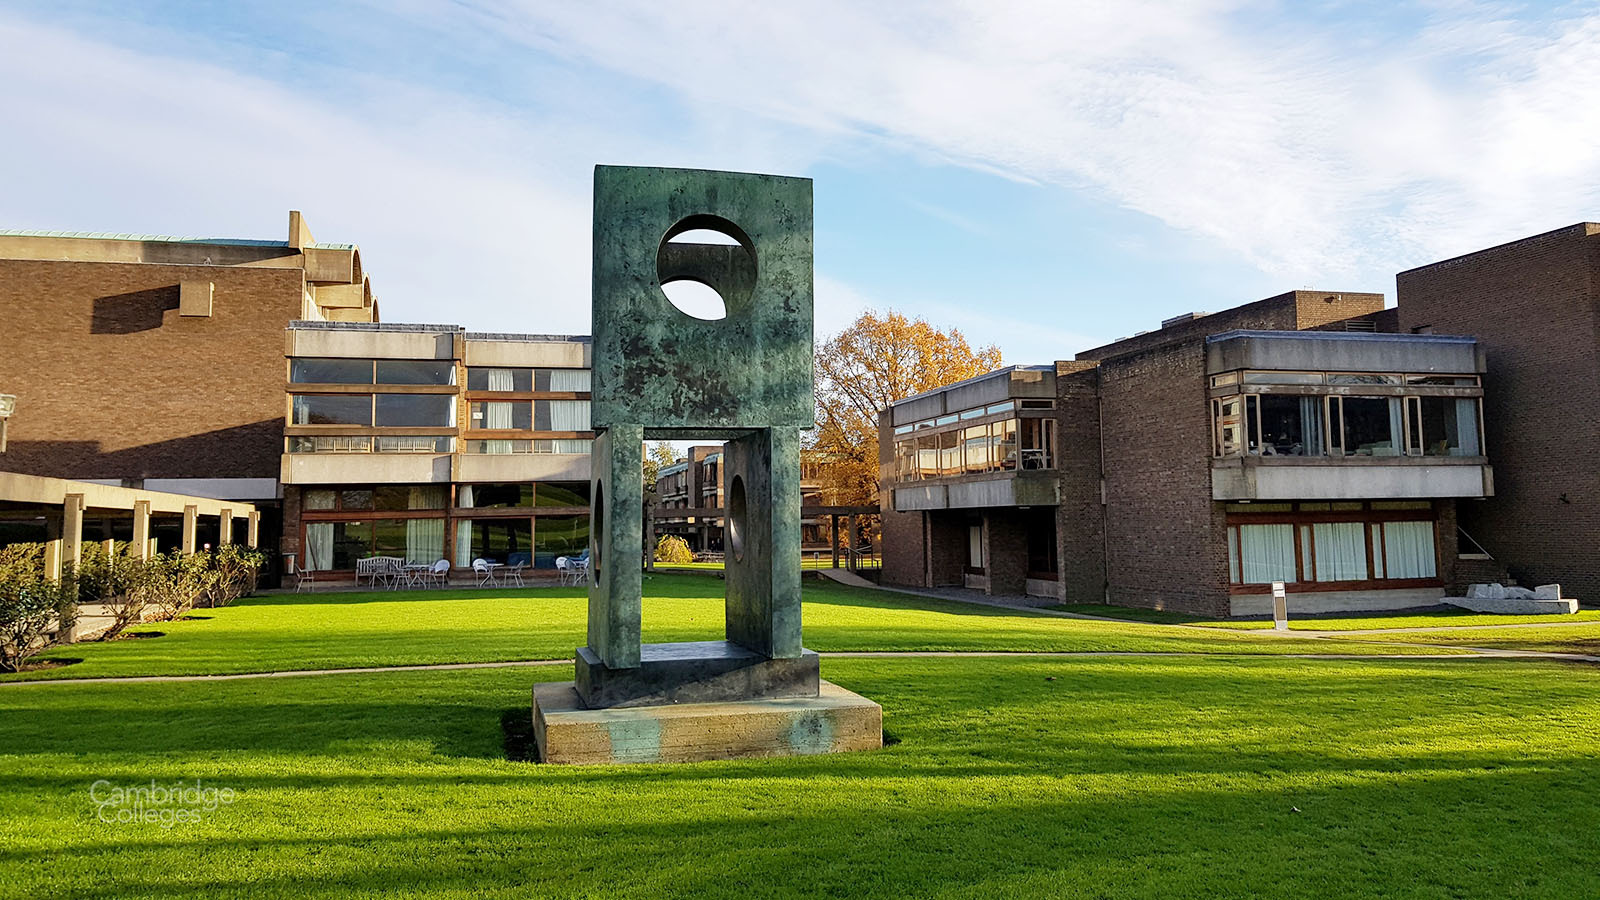 Reducing carbon emission on Churchill college's campus